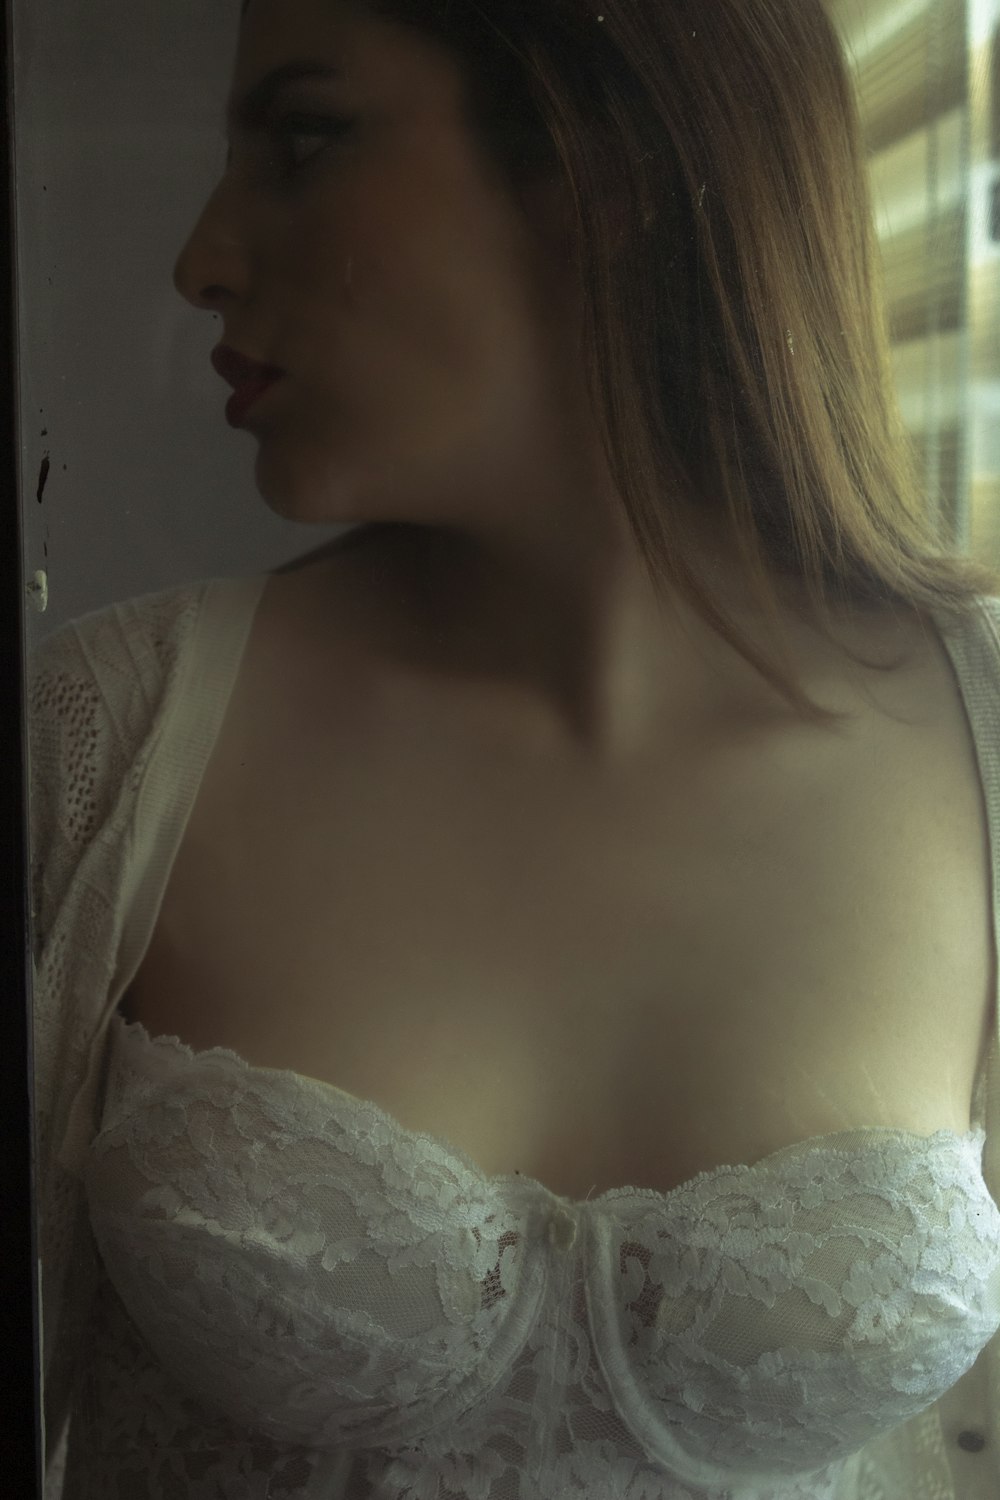 a woman in a white bra looking in a mirror